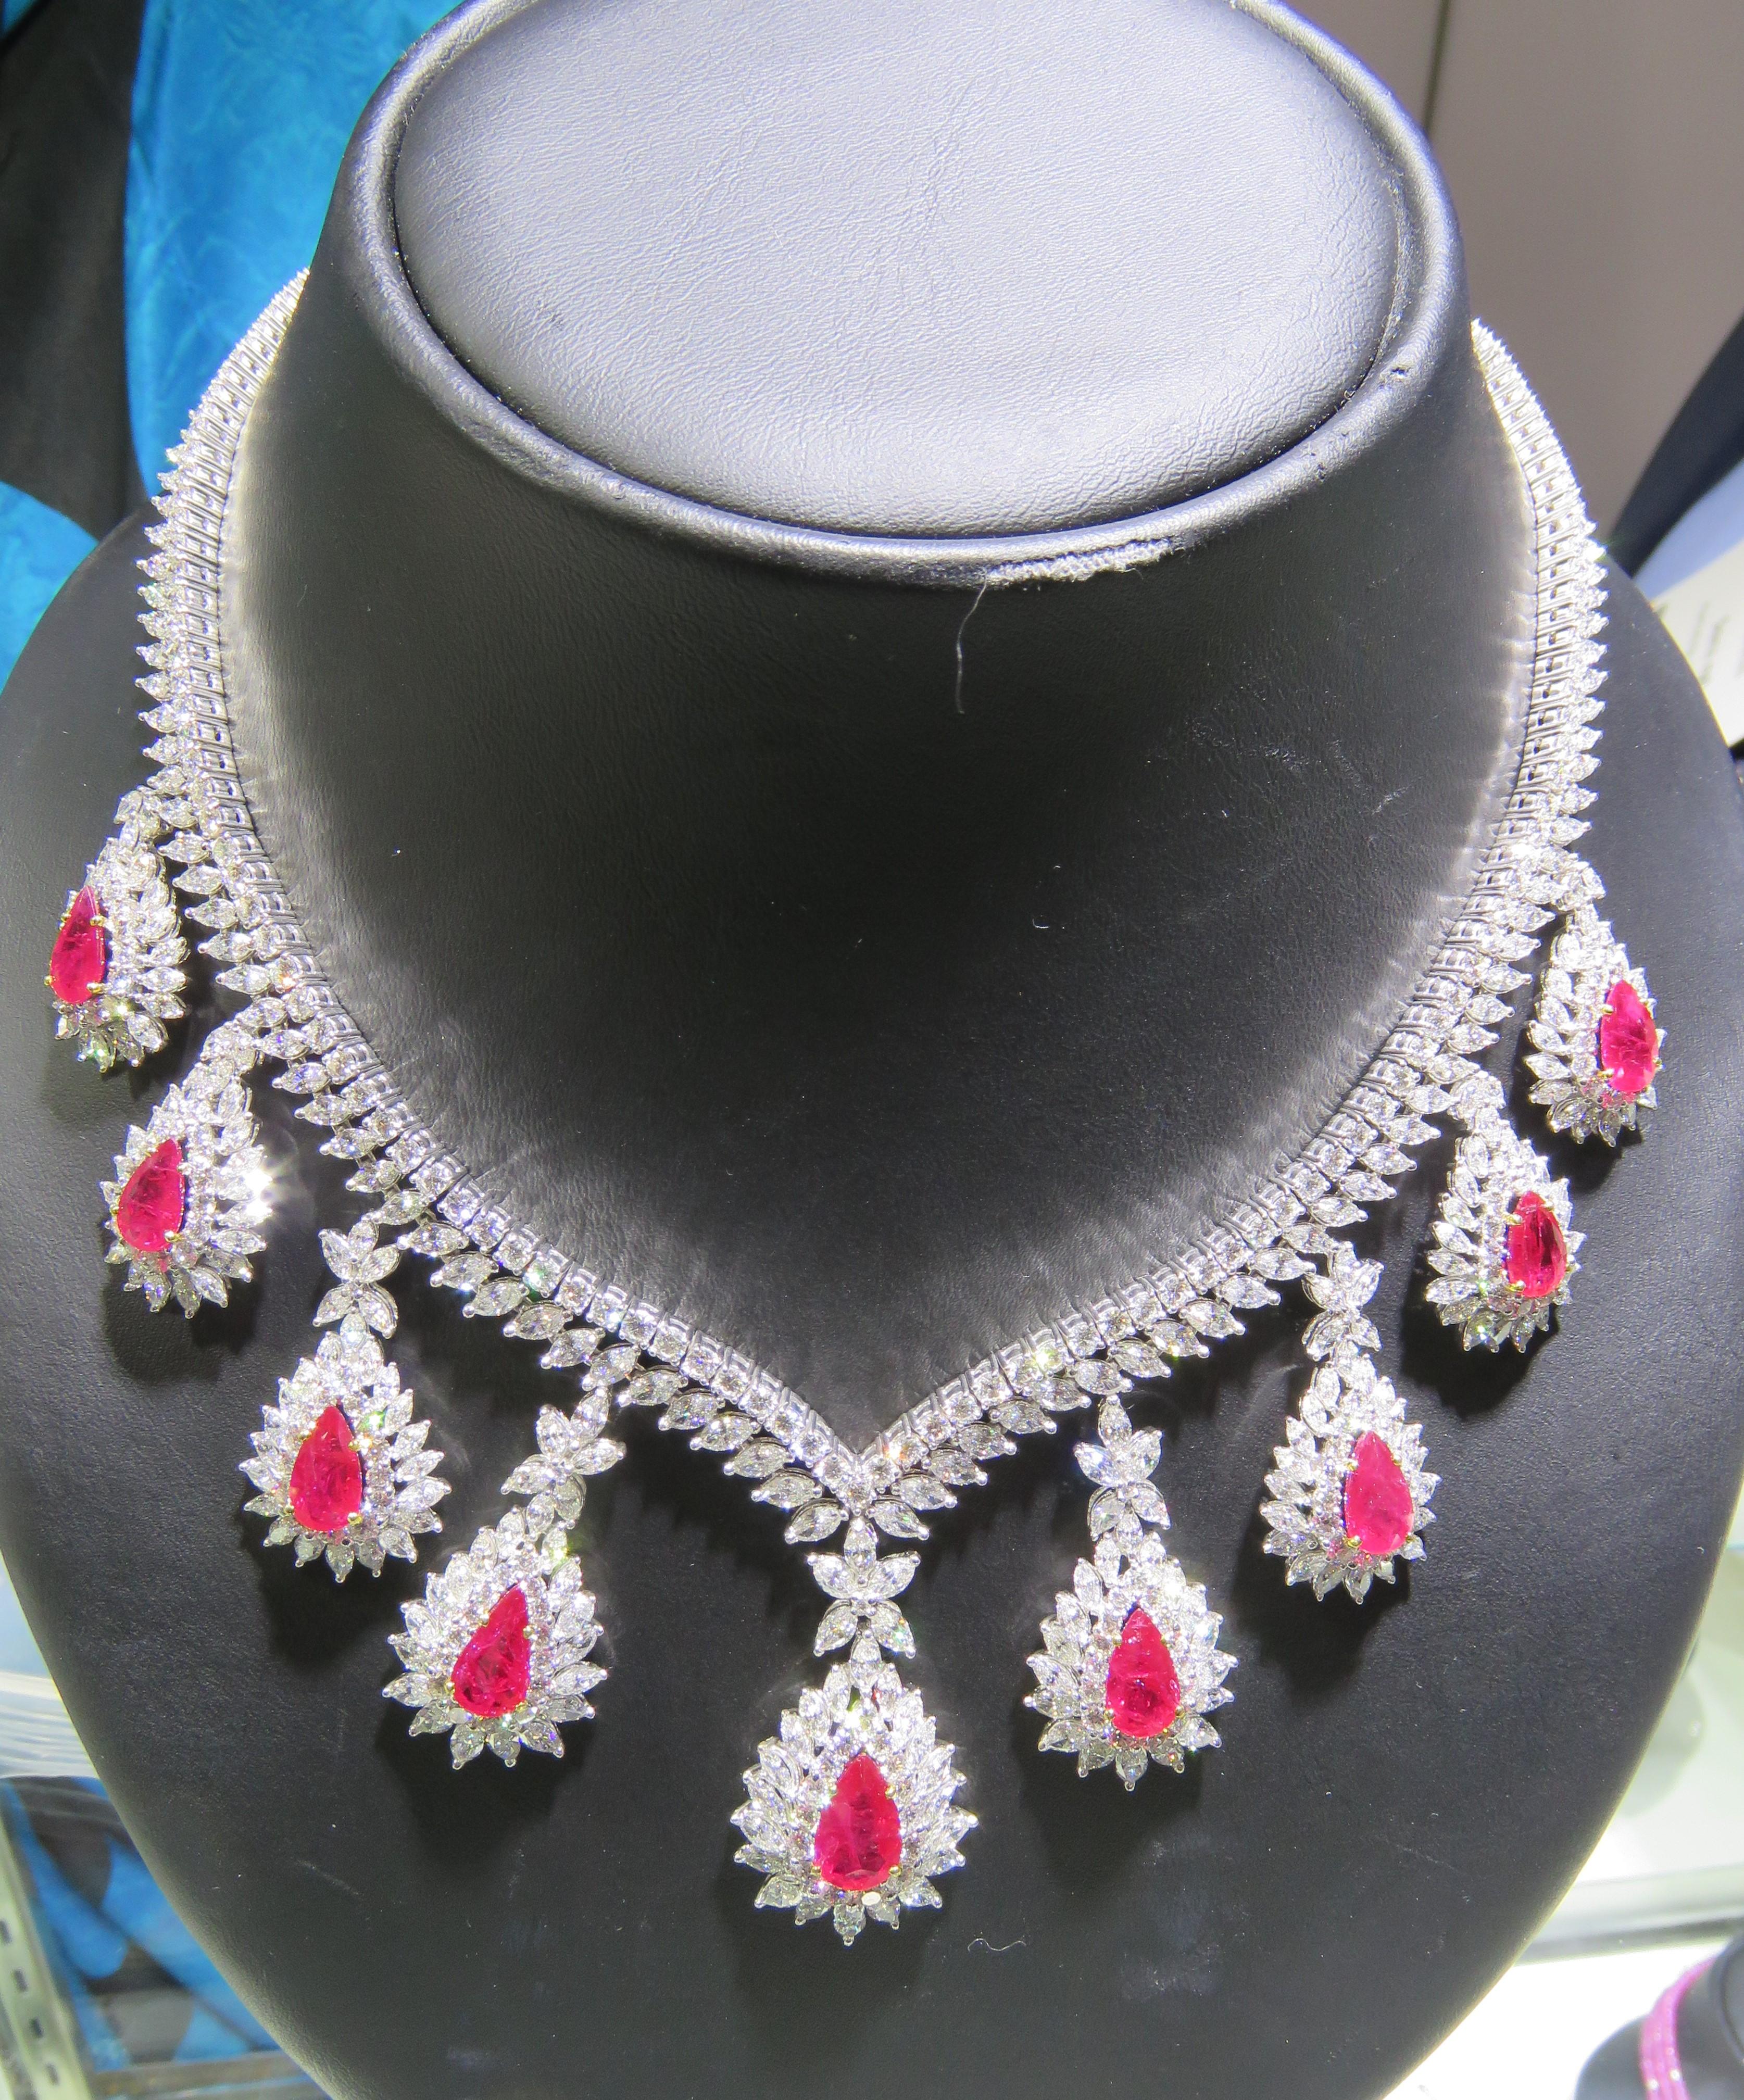 The Following Item we are offering is this Rare Important Radiant 18KT Gold Gorgeous Glittering and Sparkling Magnificent Fancy Rare Important Ruby and Diamond Necklace. Necklace contains approx 60CTS of Beautiful Fancy Rubies and Diamonds!!! Stones